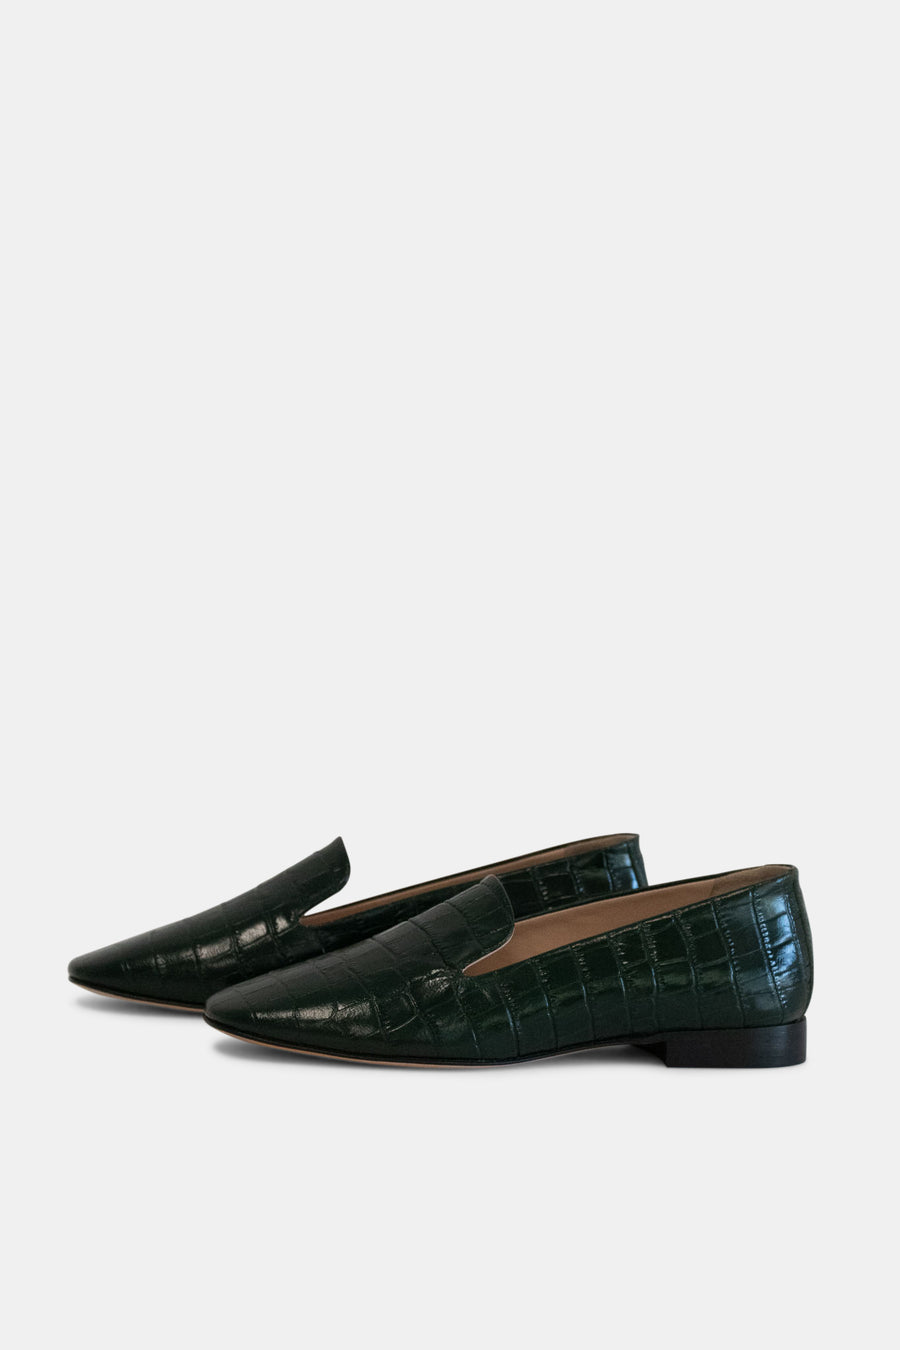 Round Toe Loafer Forest Croco - Sample Size 37